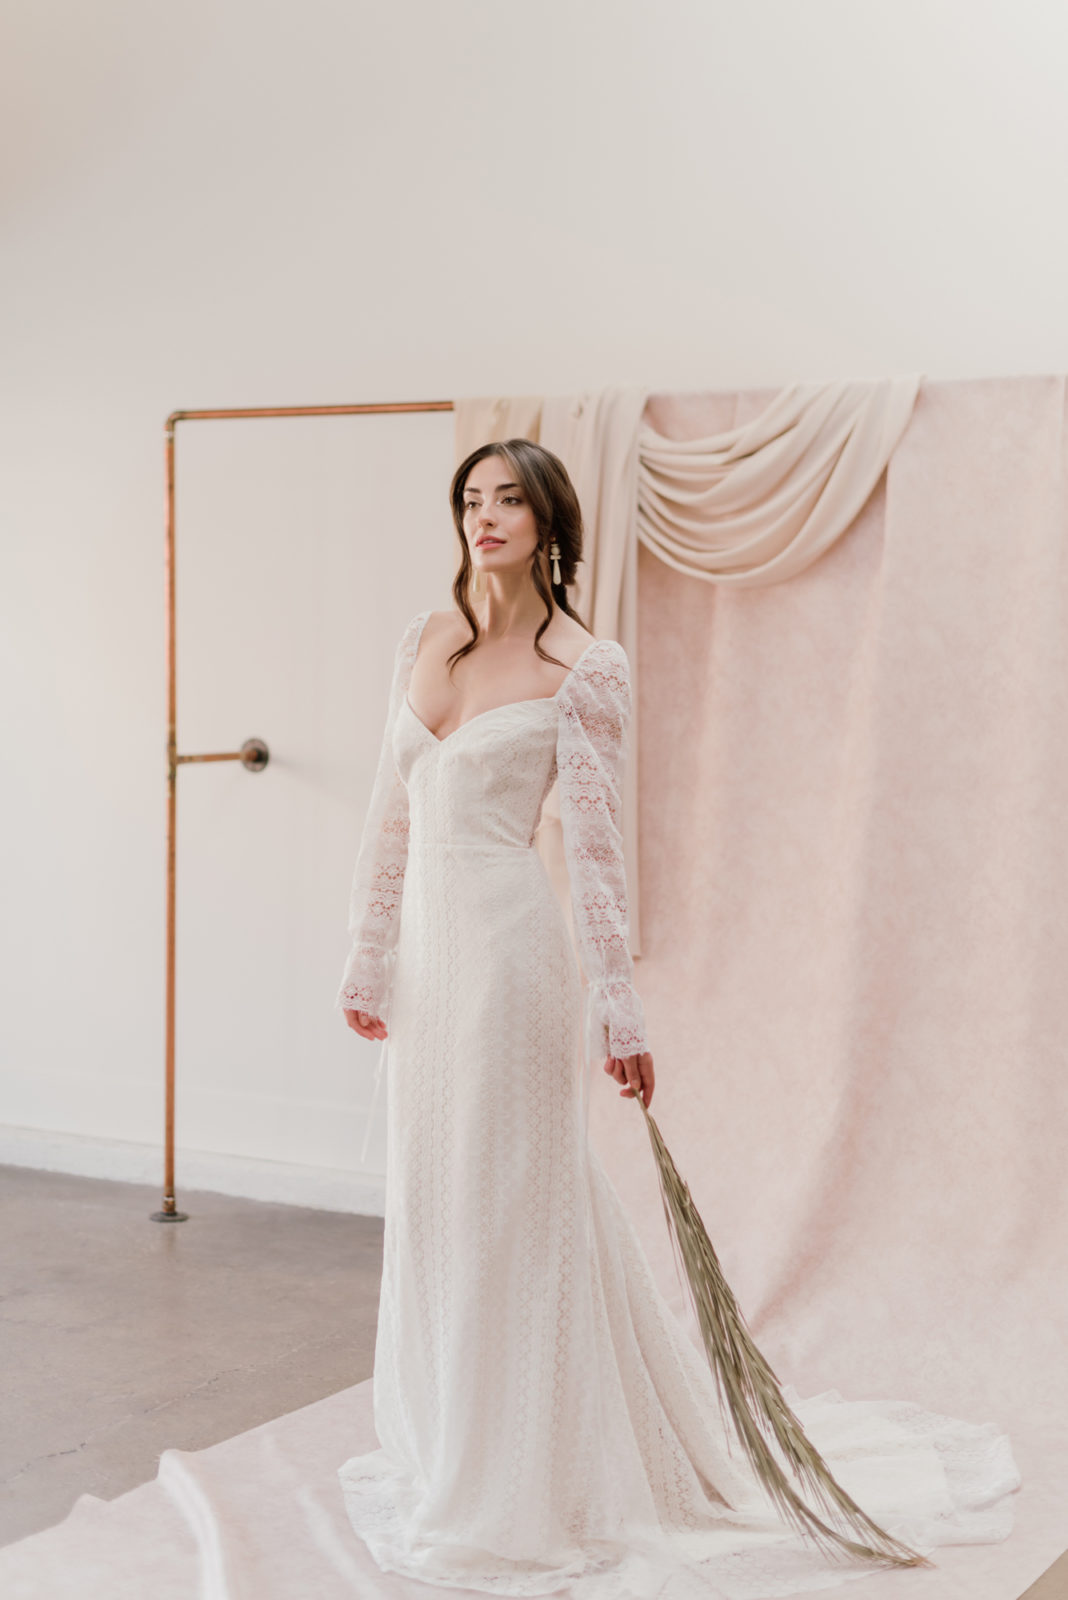 Model poses as a renaissance inspired bride for an editorial at Lovenote Bride in the Barcelona wedding dress by Laudae